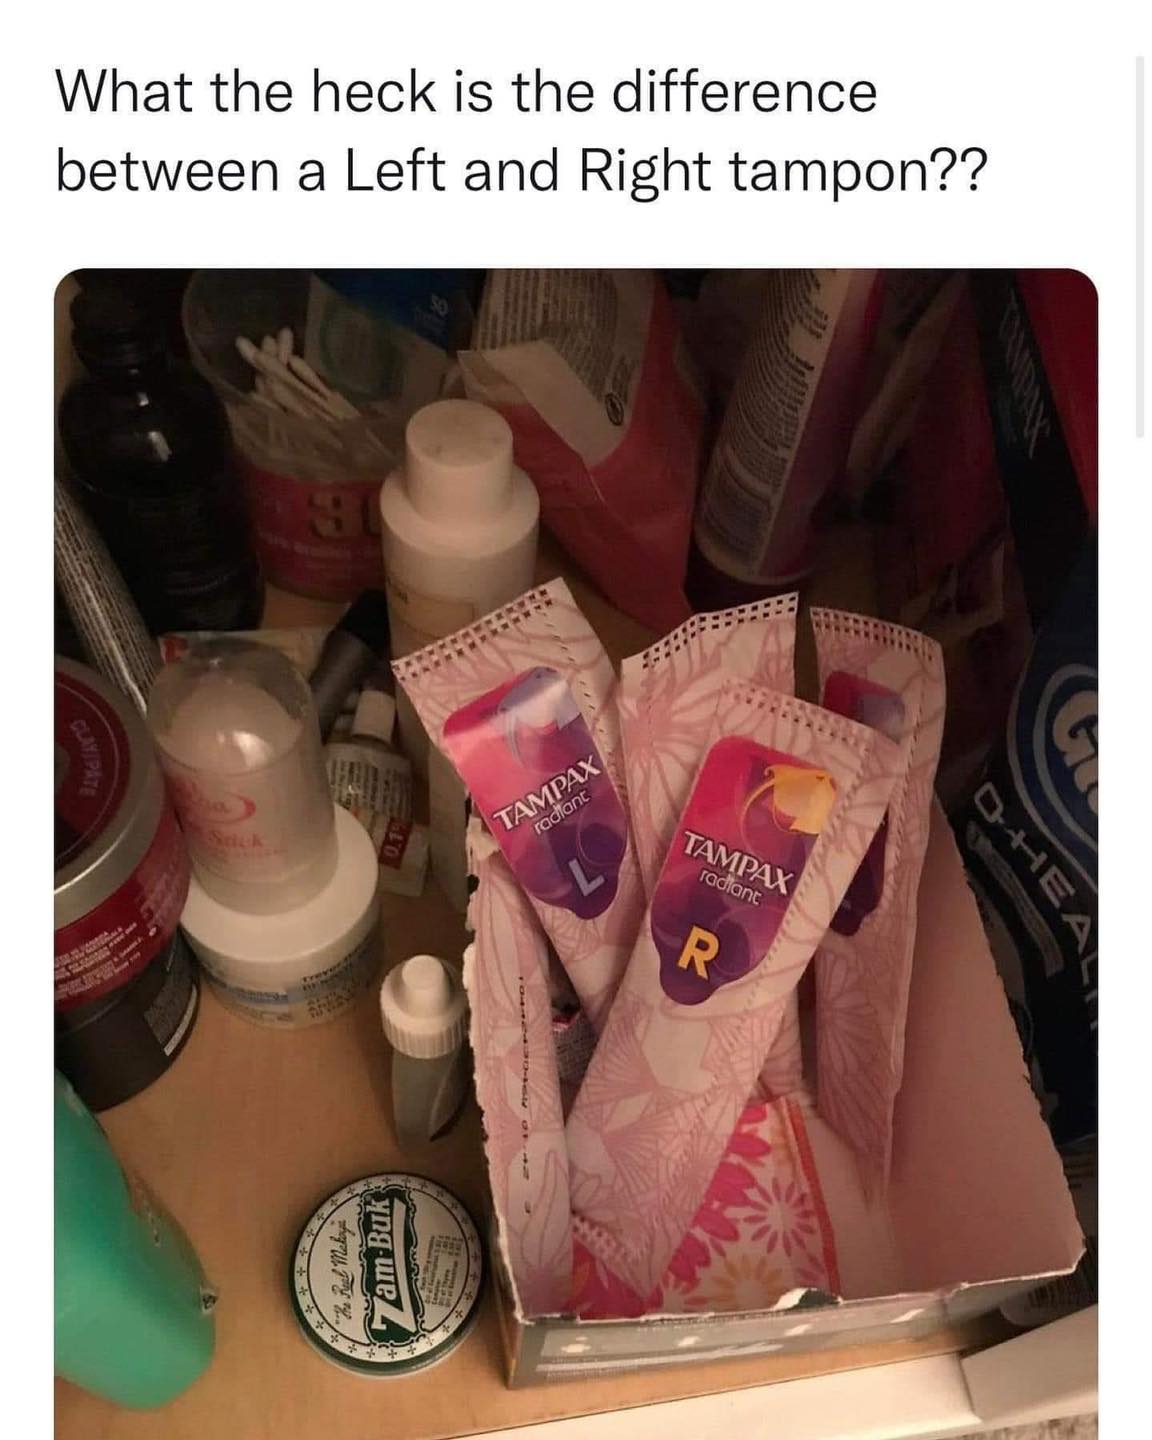 People being dumb - left and right tampons - What the heck is the difference between a Left and Right tampon?? Clayipate 30. Packing hapour pour ap 7amBuk Tampax radiant Tampax radiant R Ohea